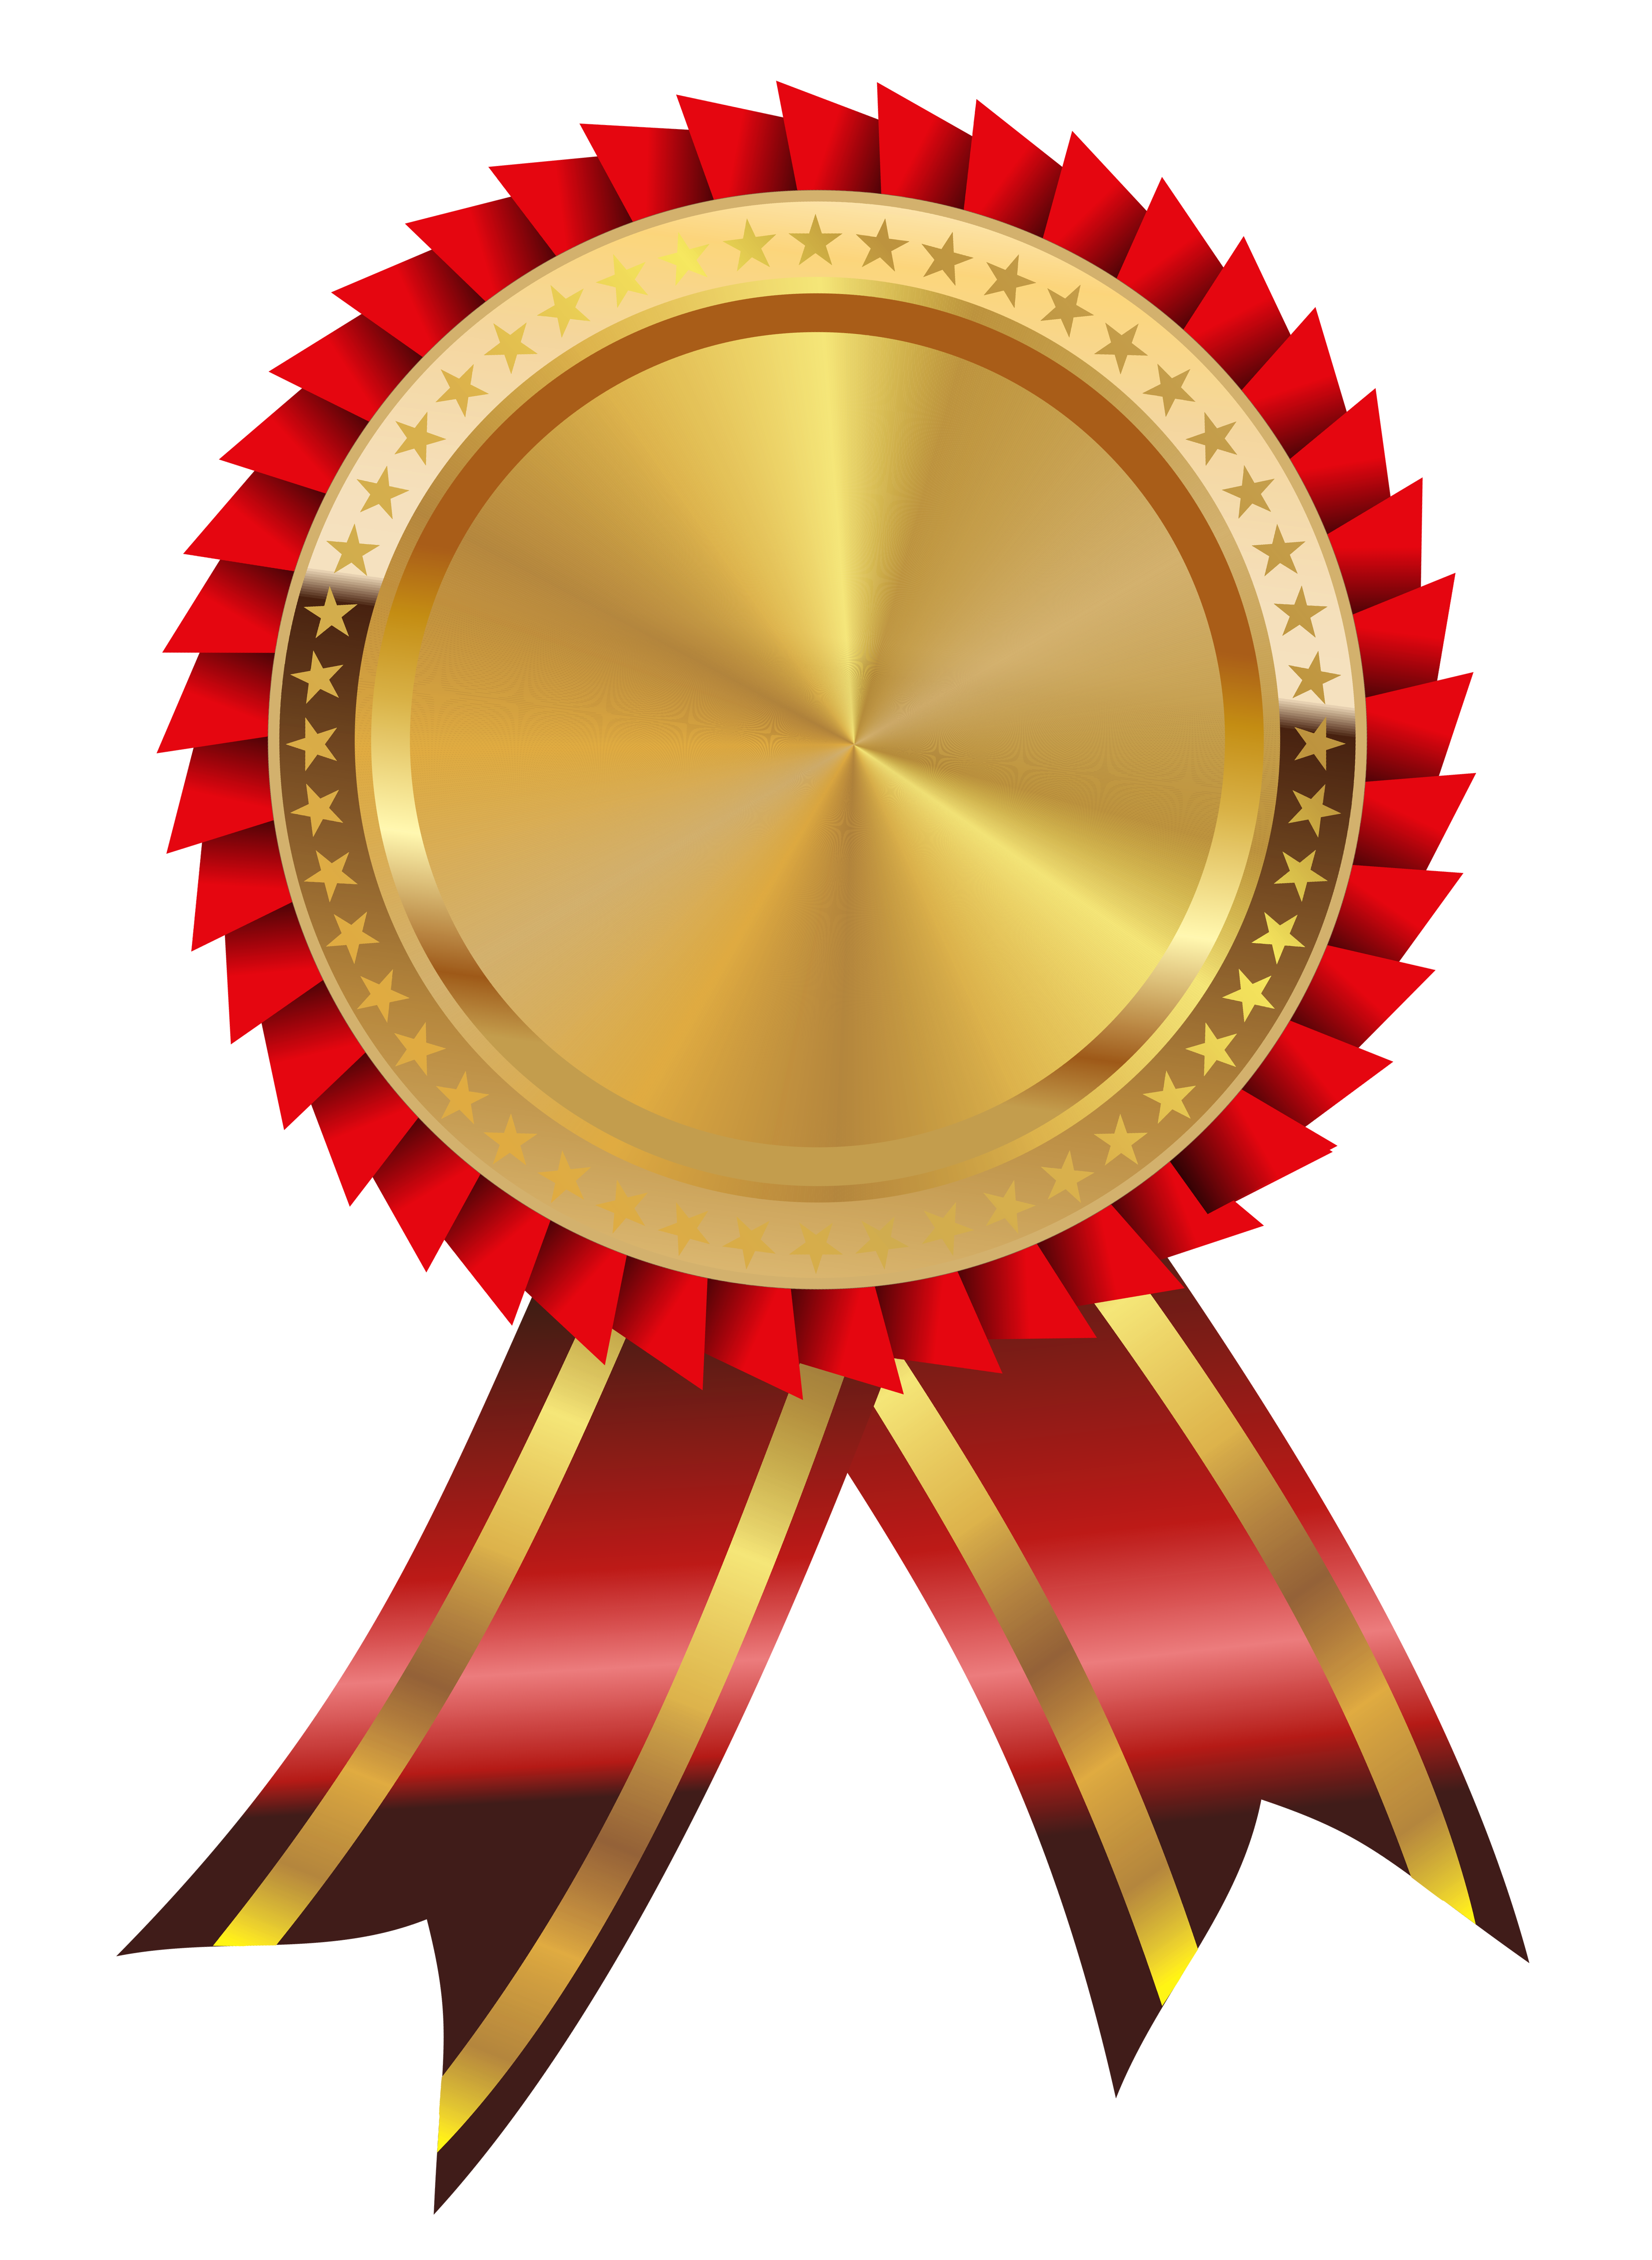 Gold and Red Medal PNG Clipart Image.